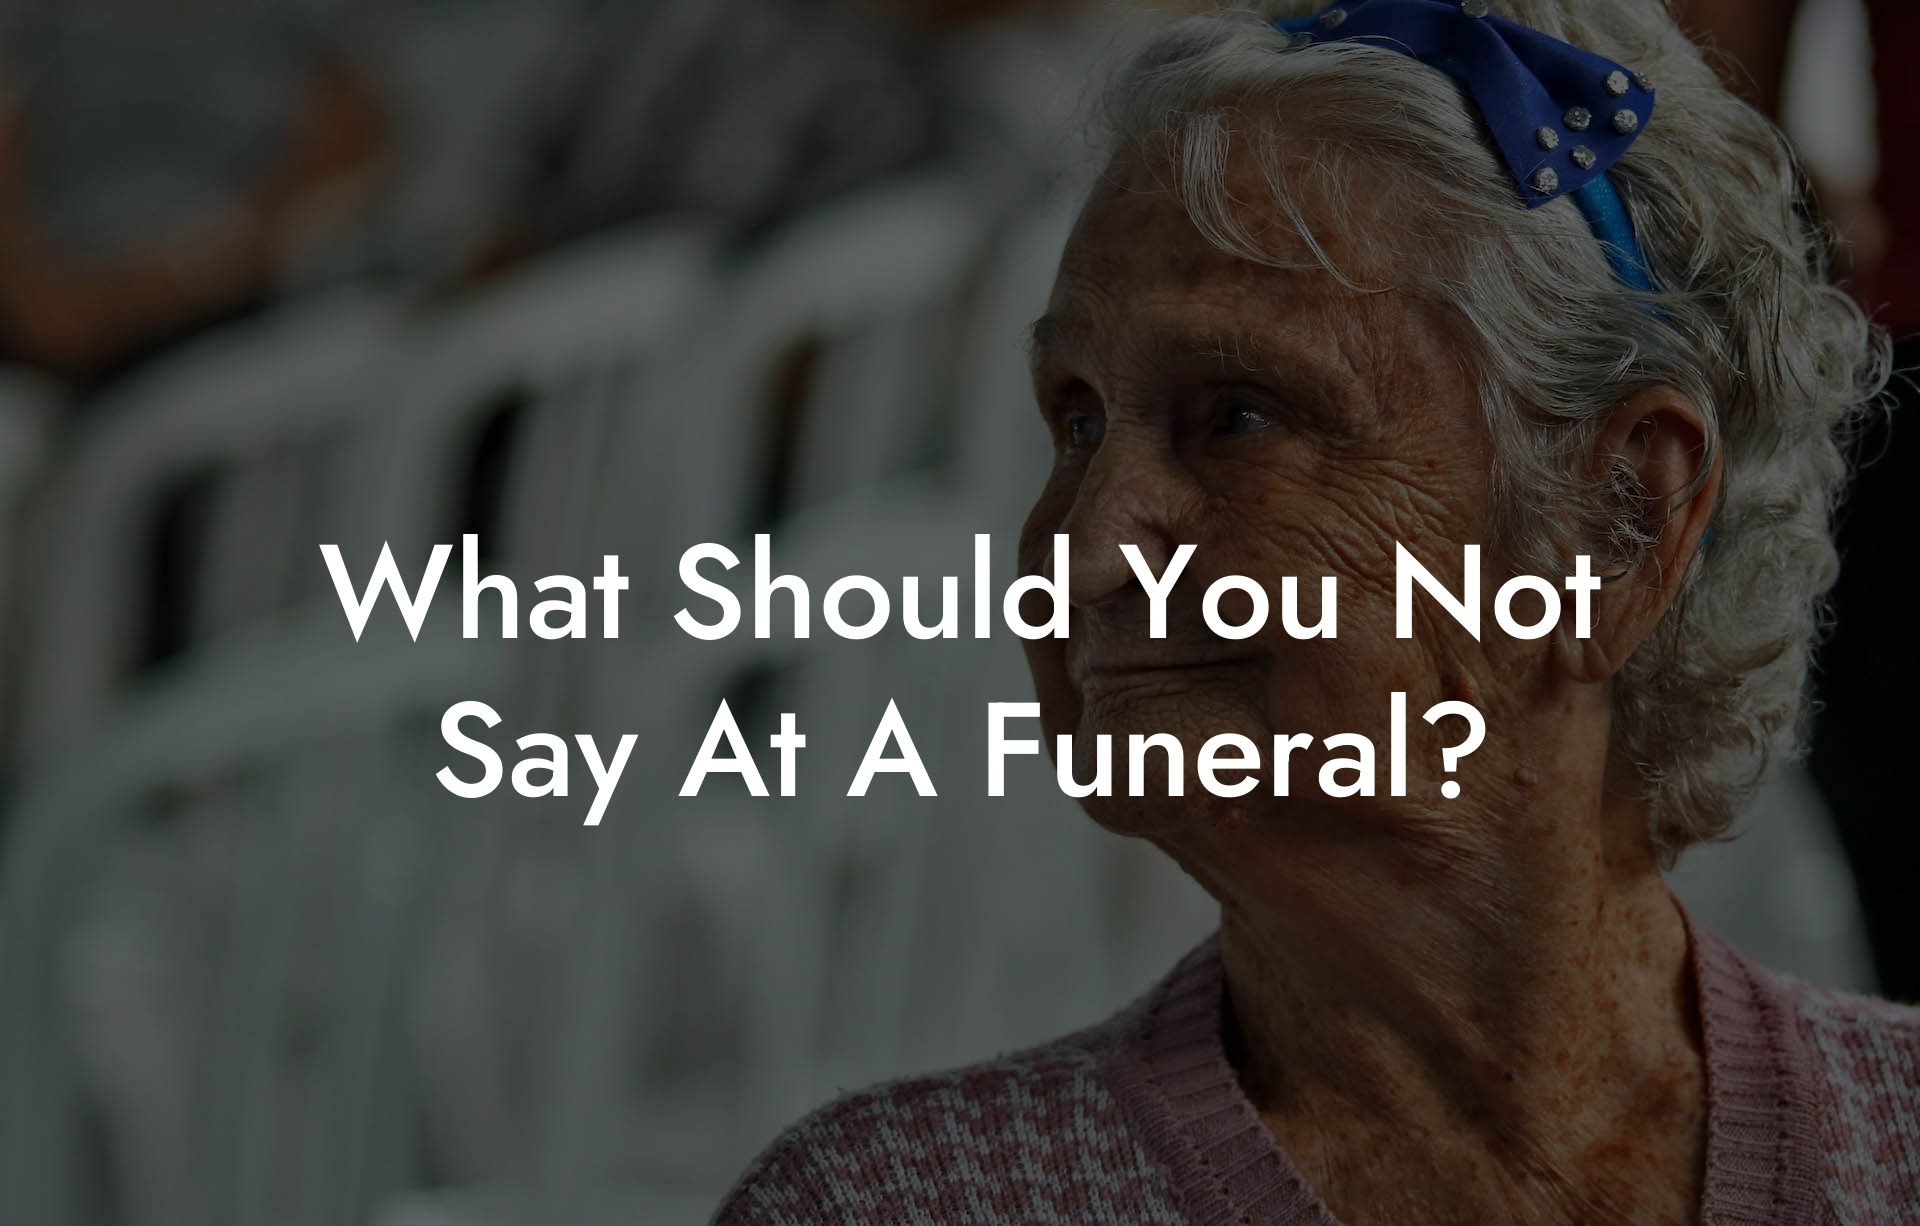 What Should You Not Say At A Funeral?